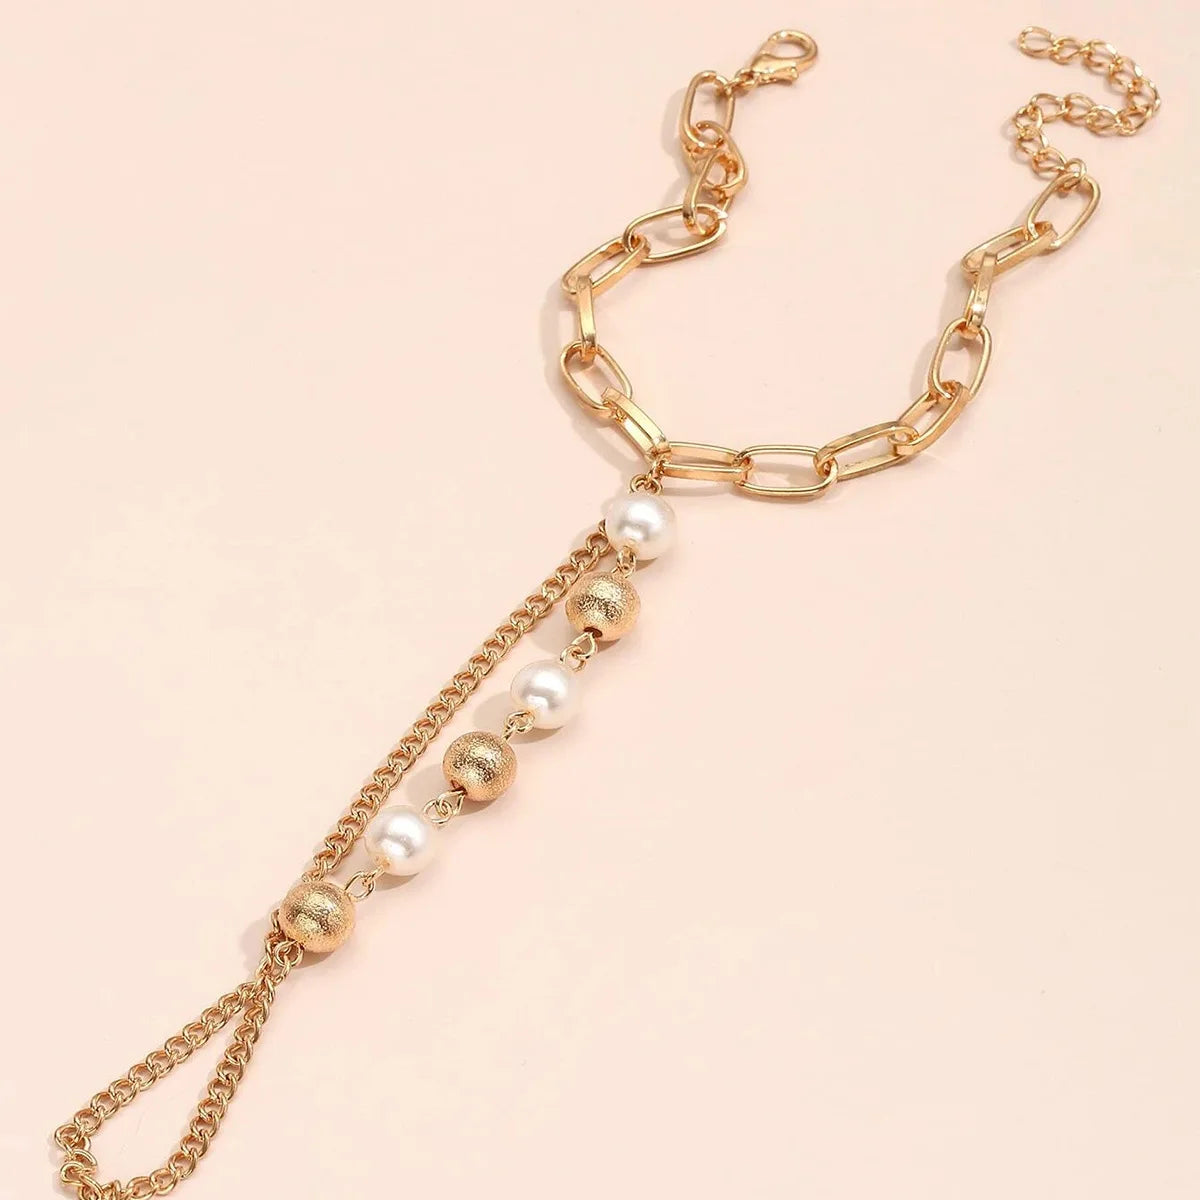 Gold Color Metal Imitation Pearl Beads Connected Bracelet